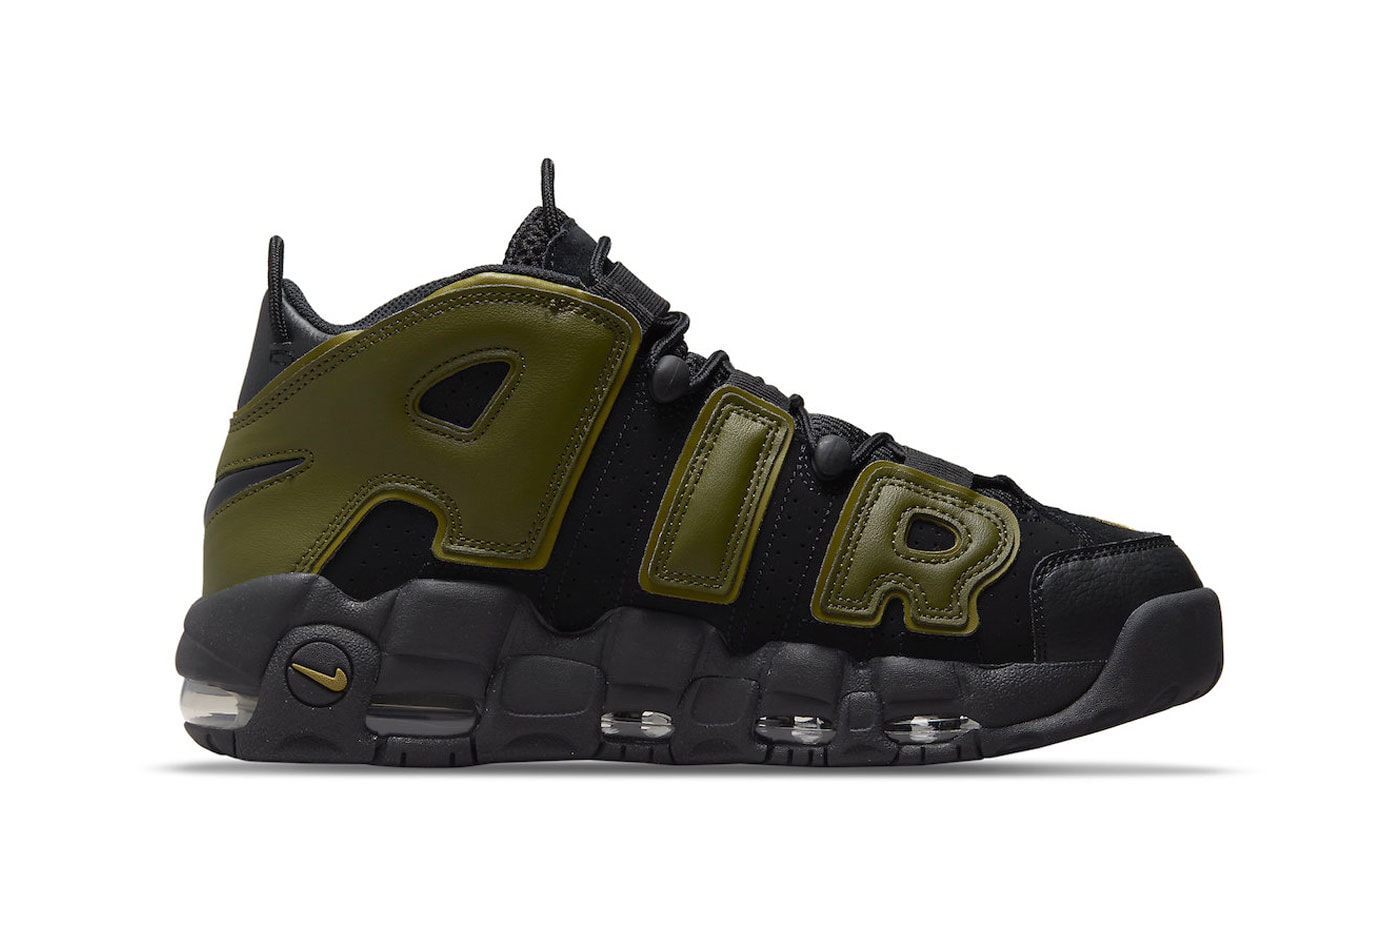 New Nike Air More Uptempo "Rough Green" Is Coming Soon DH8011-001 black green pilgrim army military garb nubuck leather